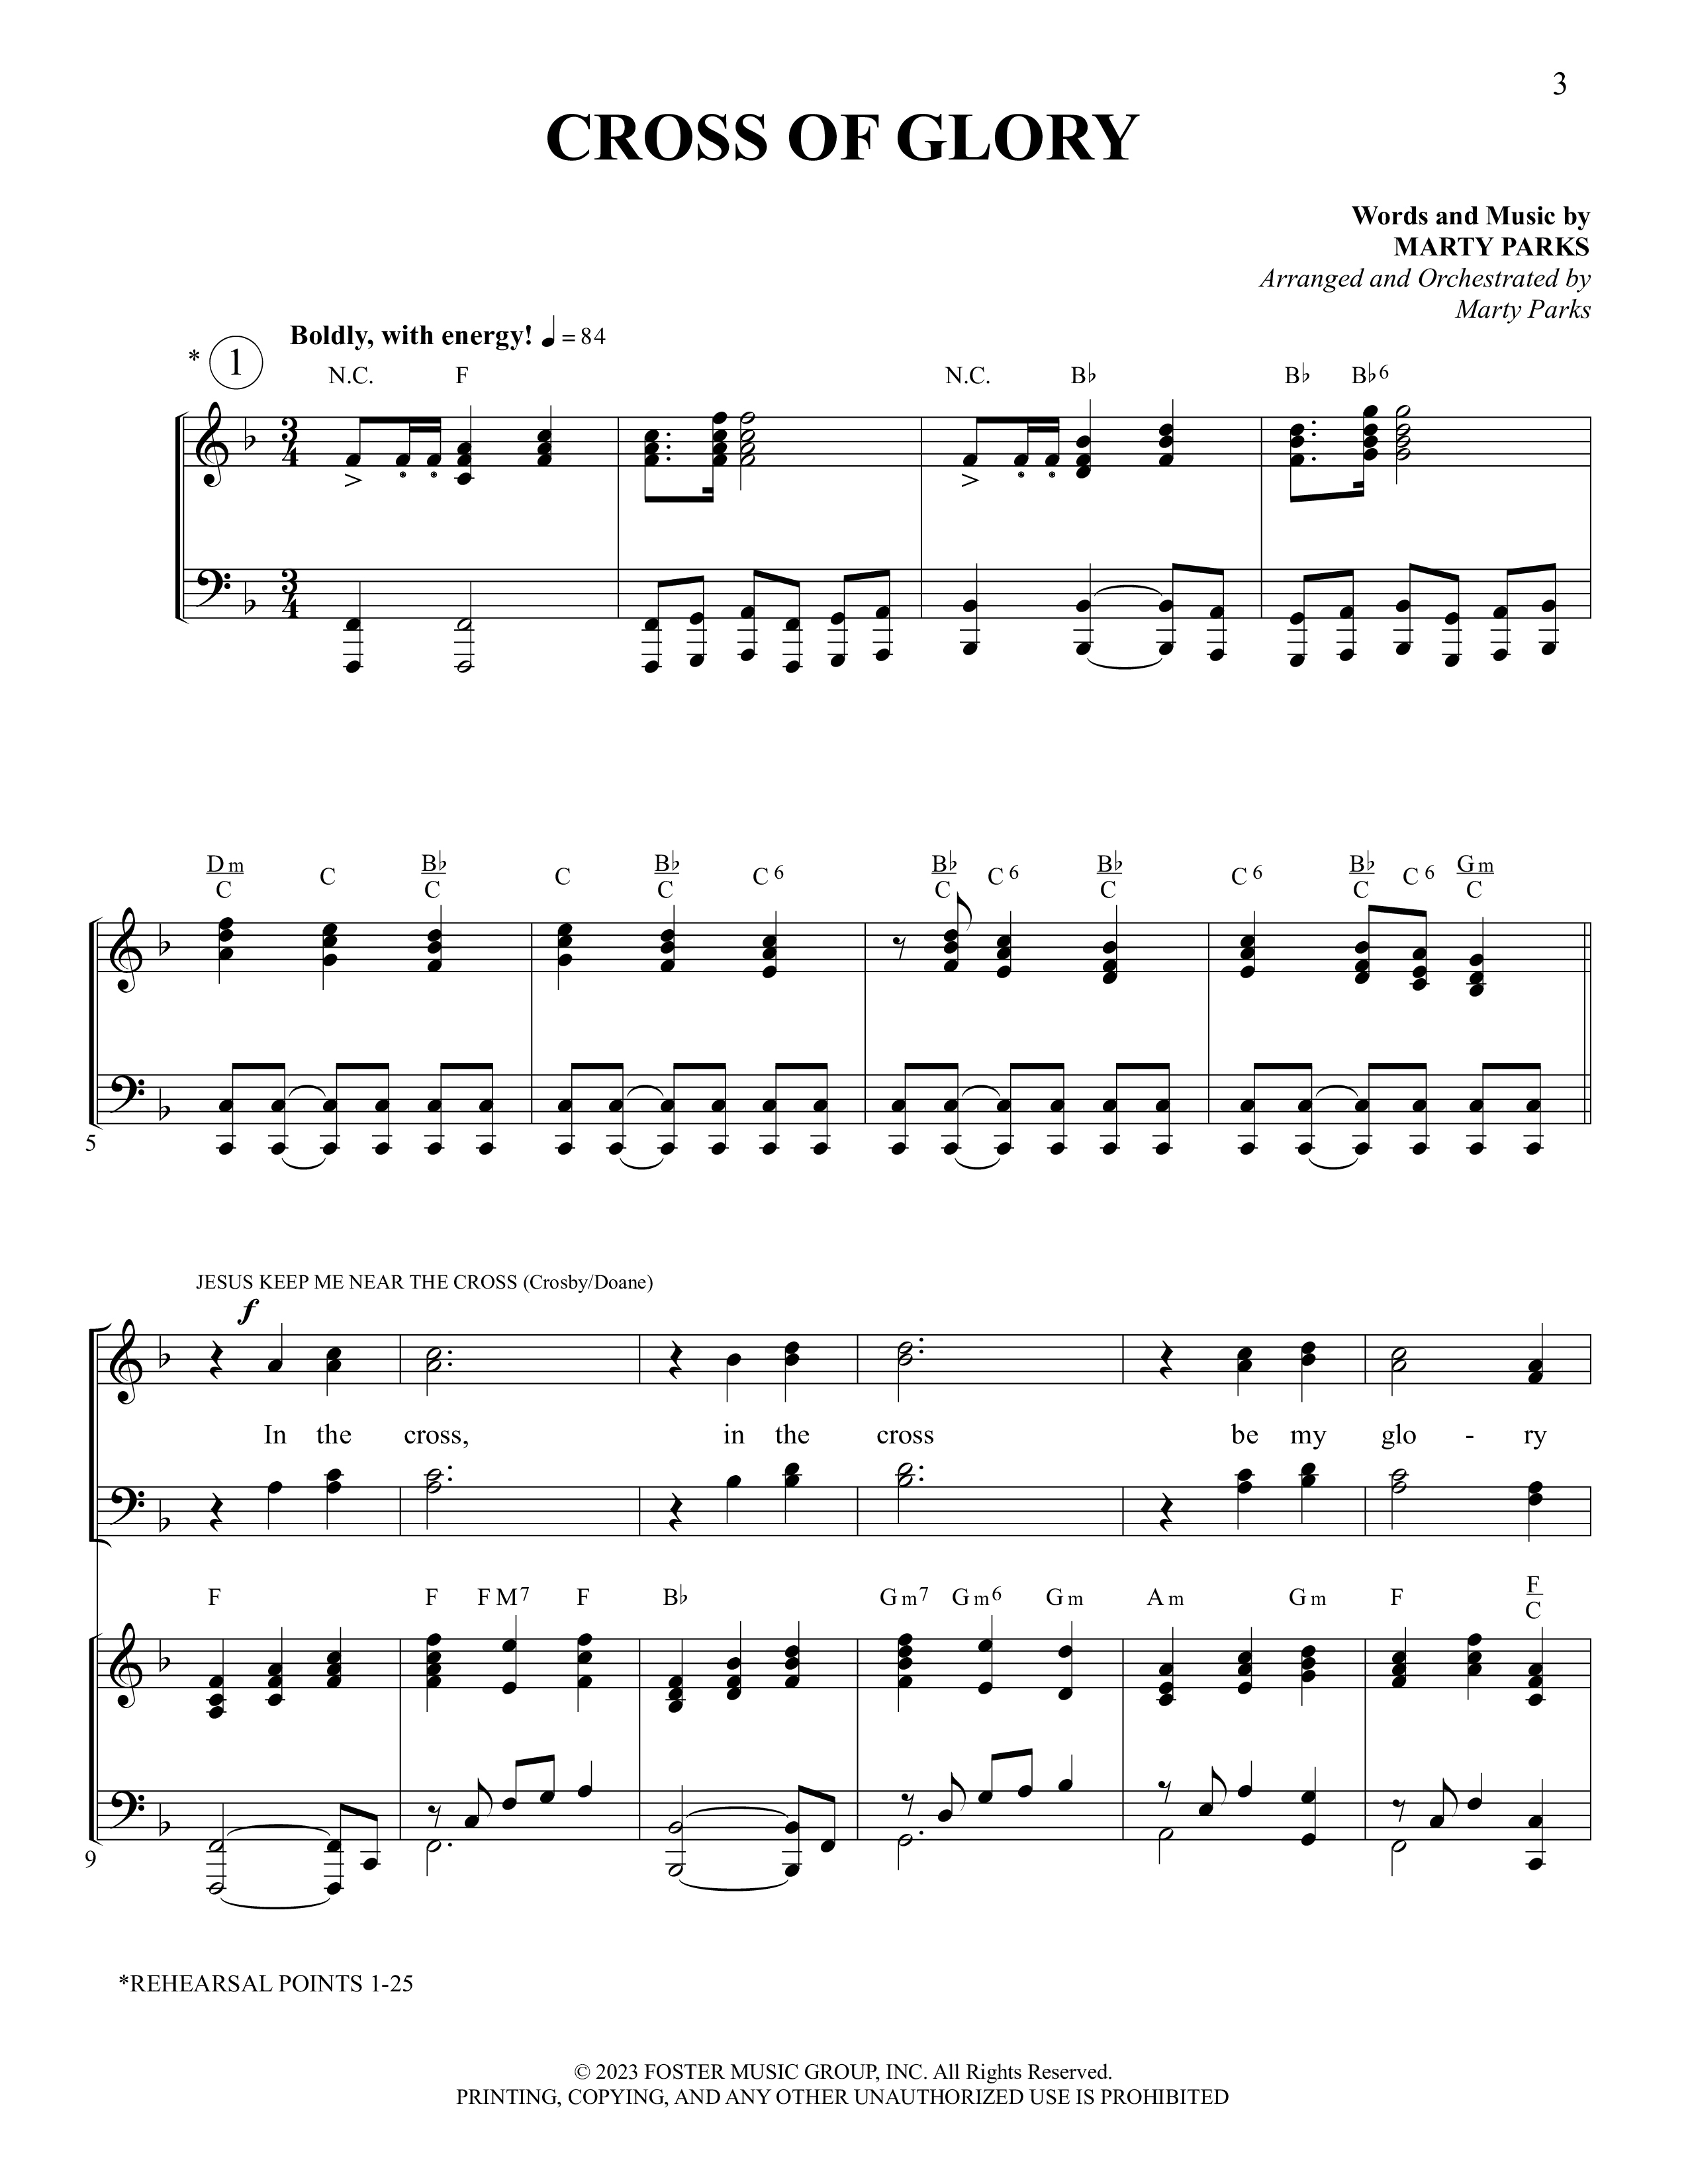 Glorious Cross (5 Song Choral Collection) Song 1 (Piano SATB) (Foster Music Group / Arr. Marty Parks)